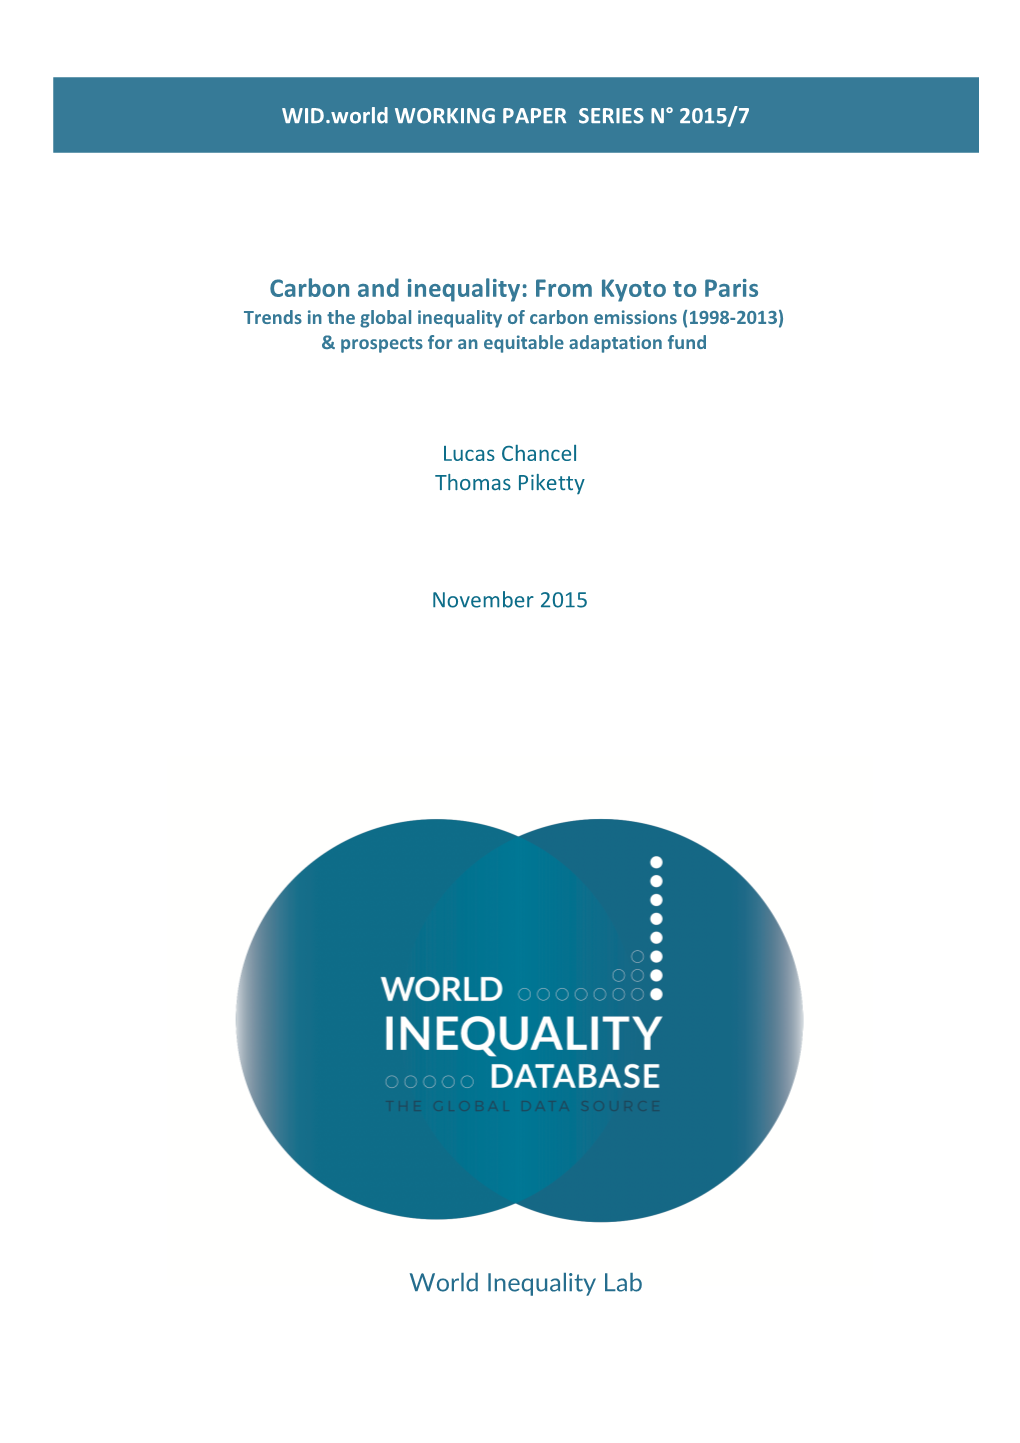 Carbon and Inequality: from Kyoto to Paris Trends in the Global Inequality of Carbon Emissions (1998-2013) & Prospects for an Equitable Adaptation Fund